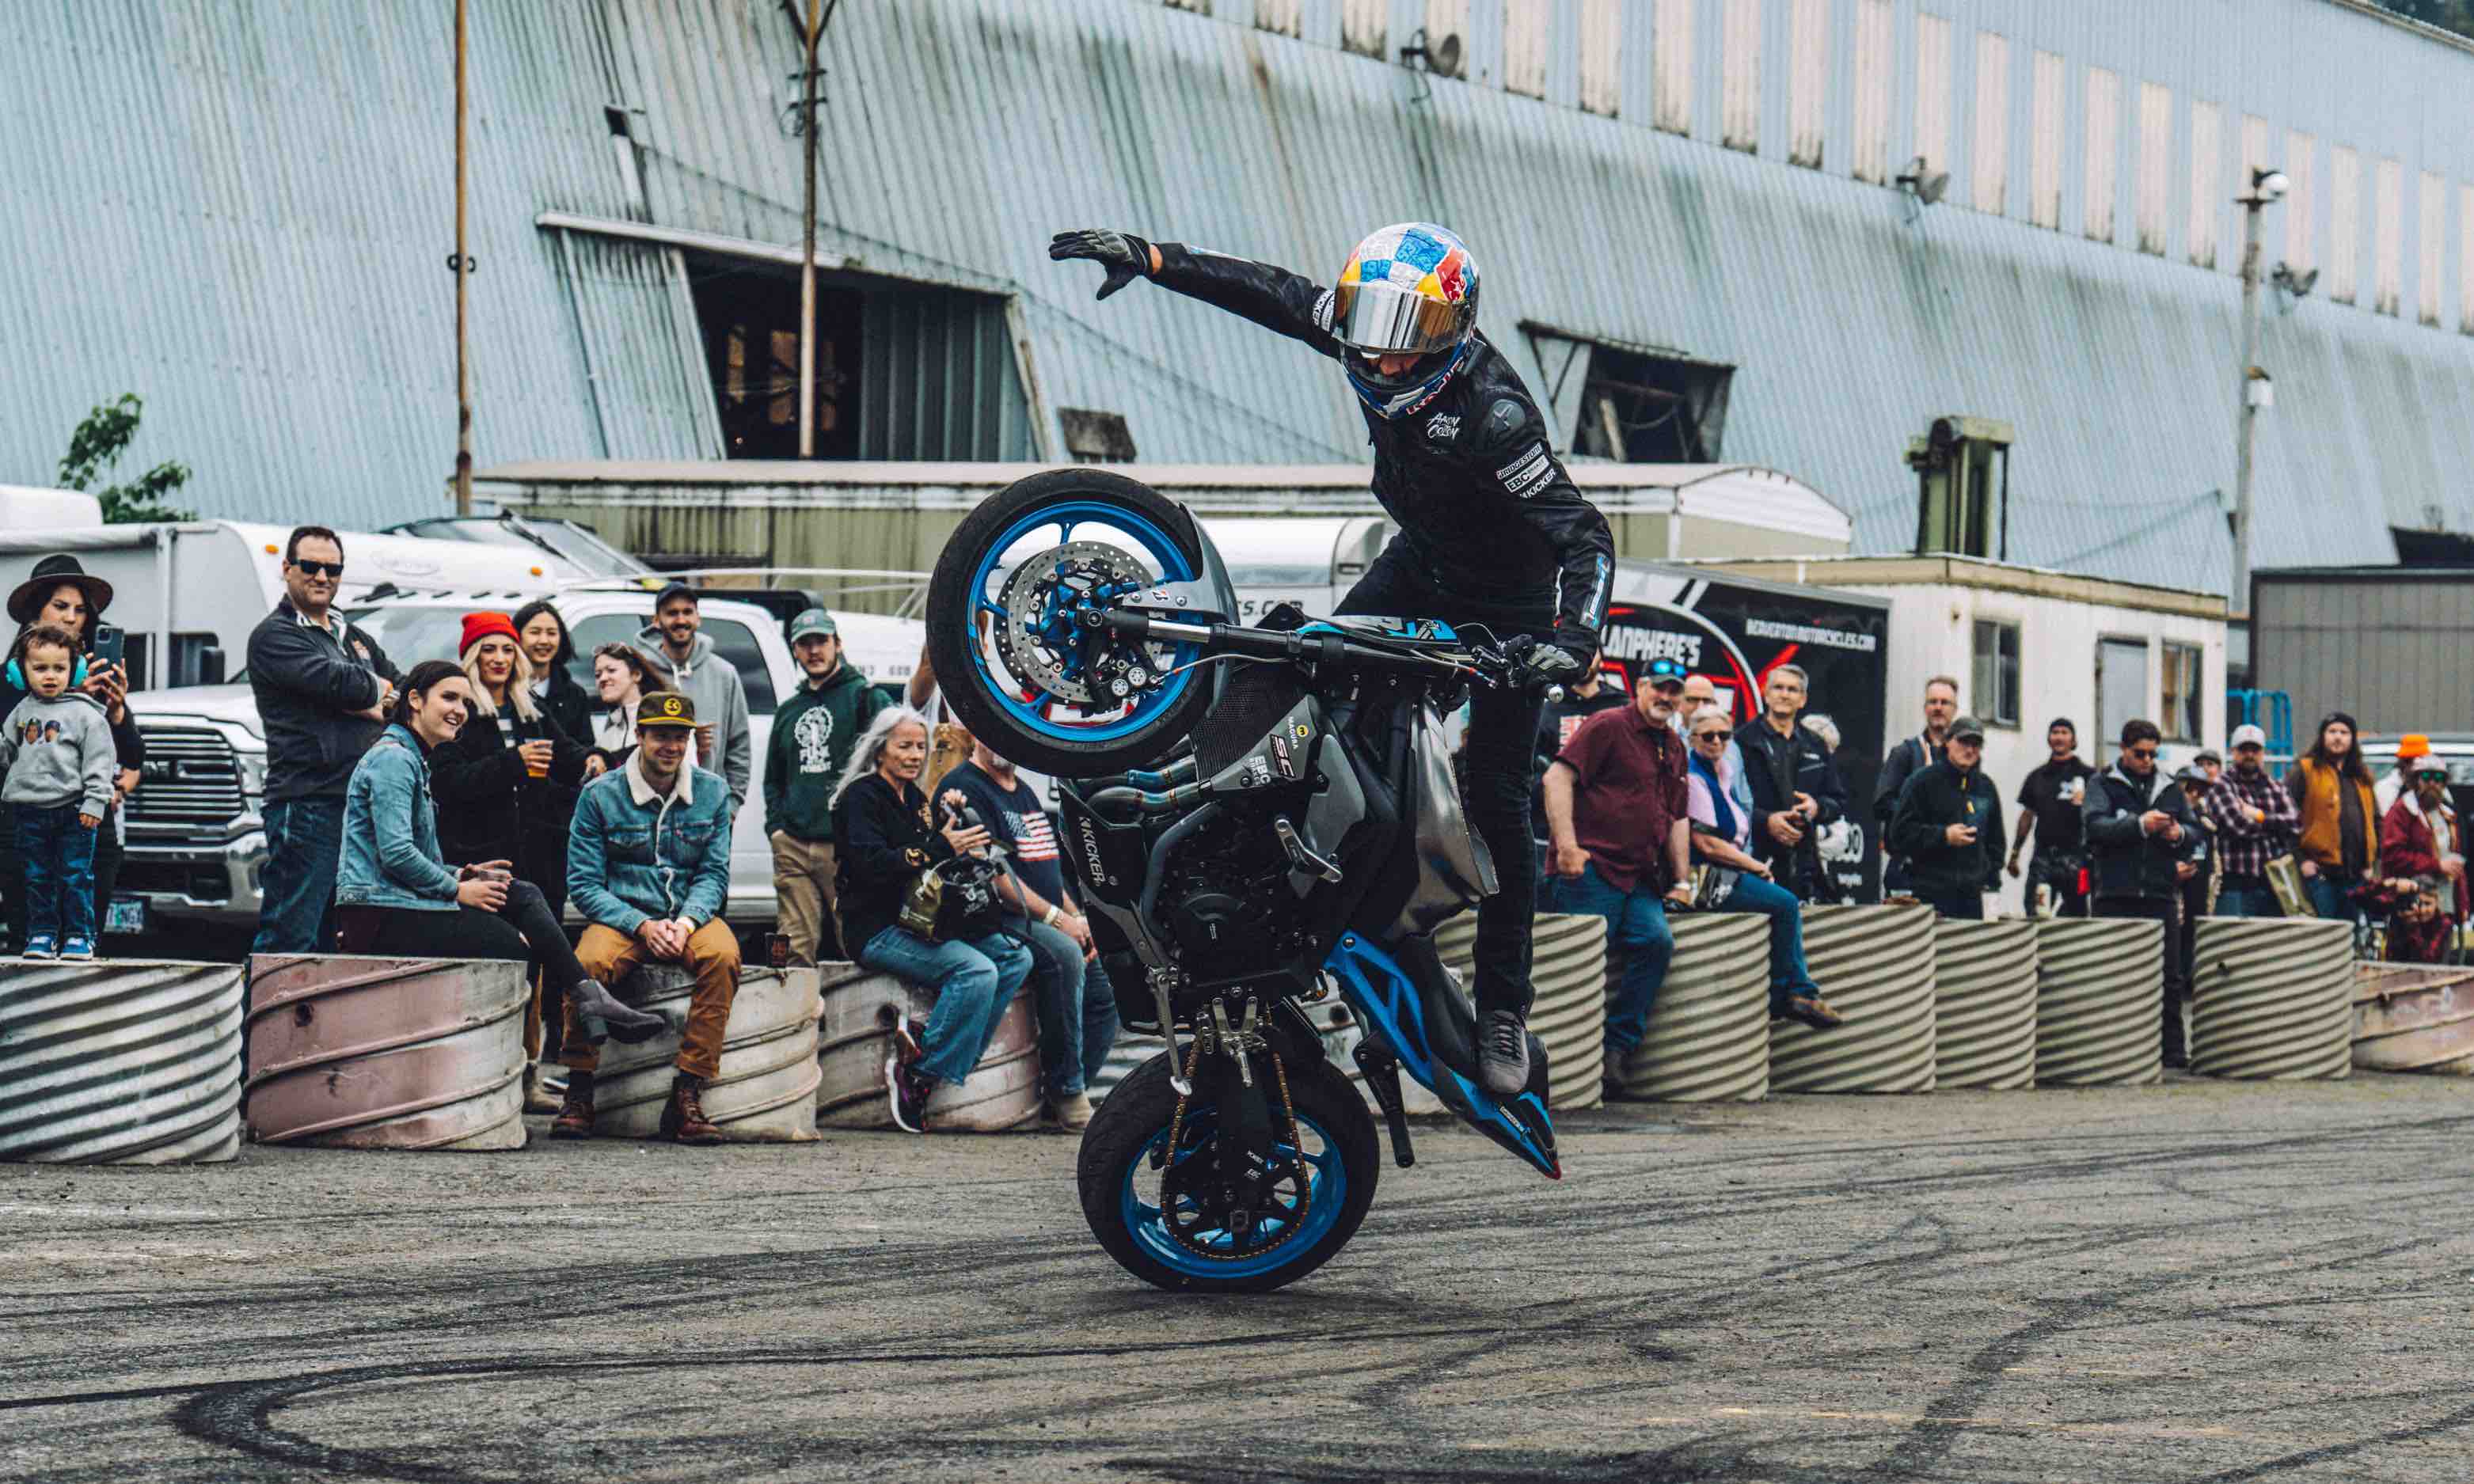 Motorcyclist performing one wheel trick